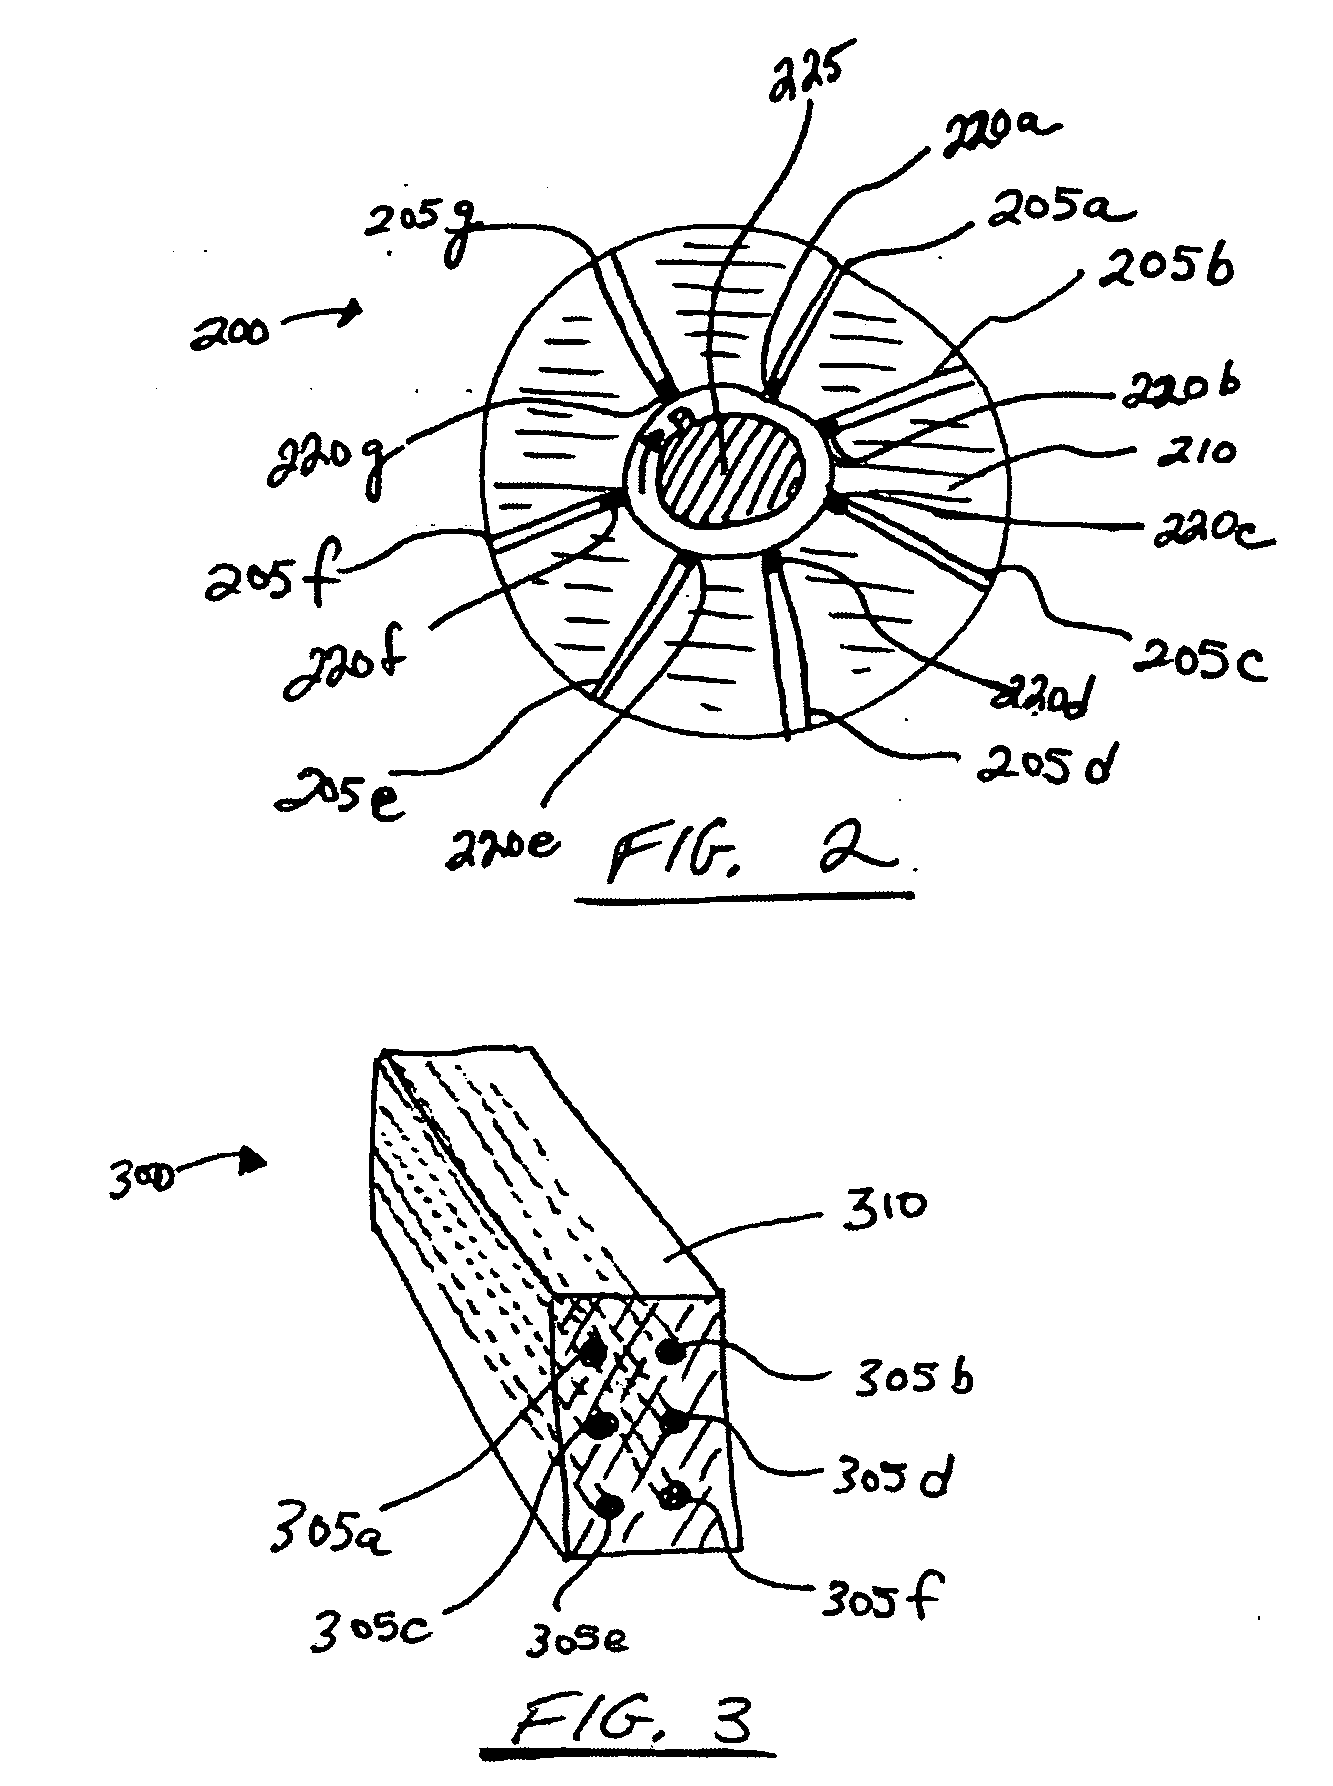 Pulsed detonation engines for reaction control systems